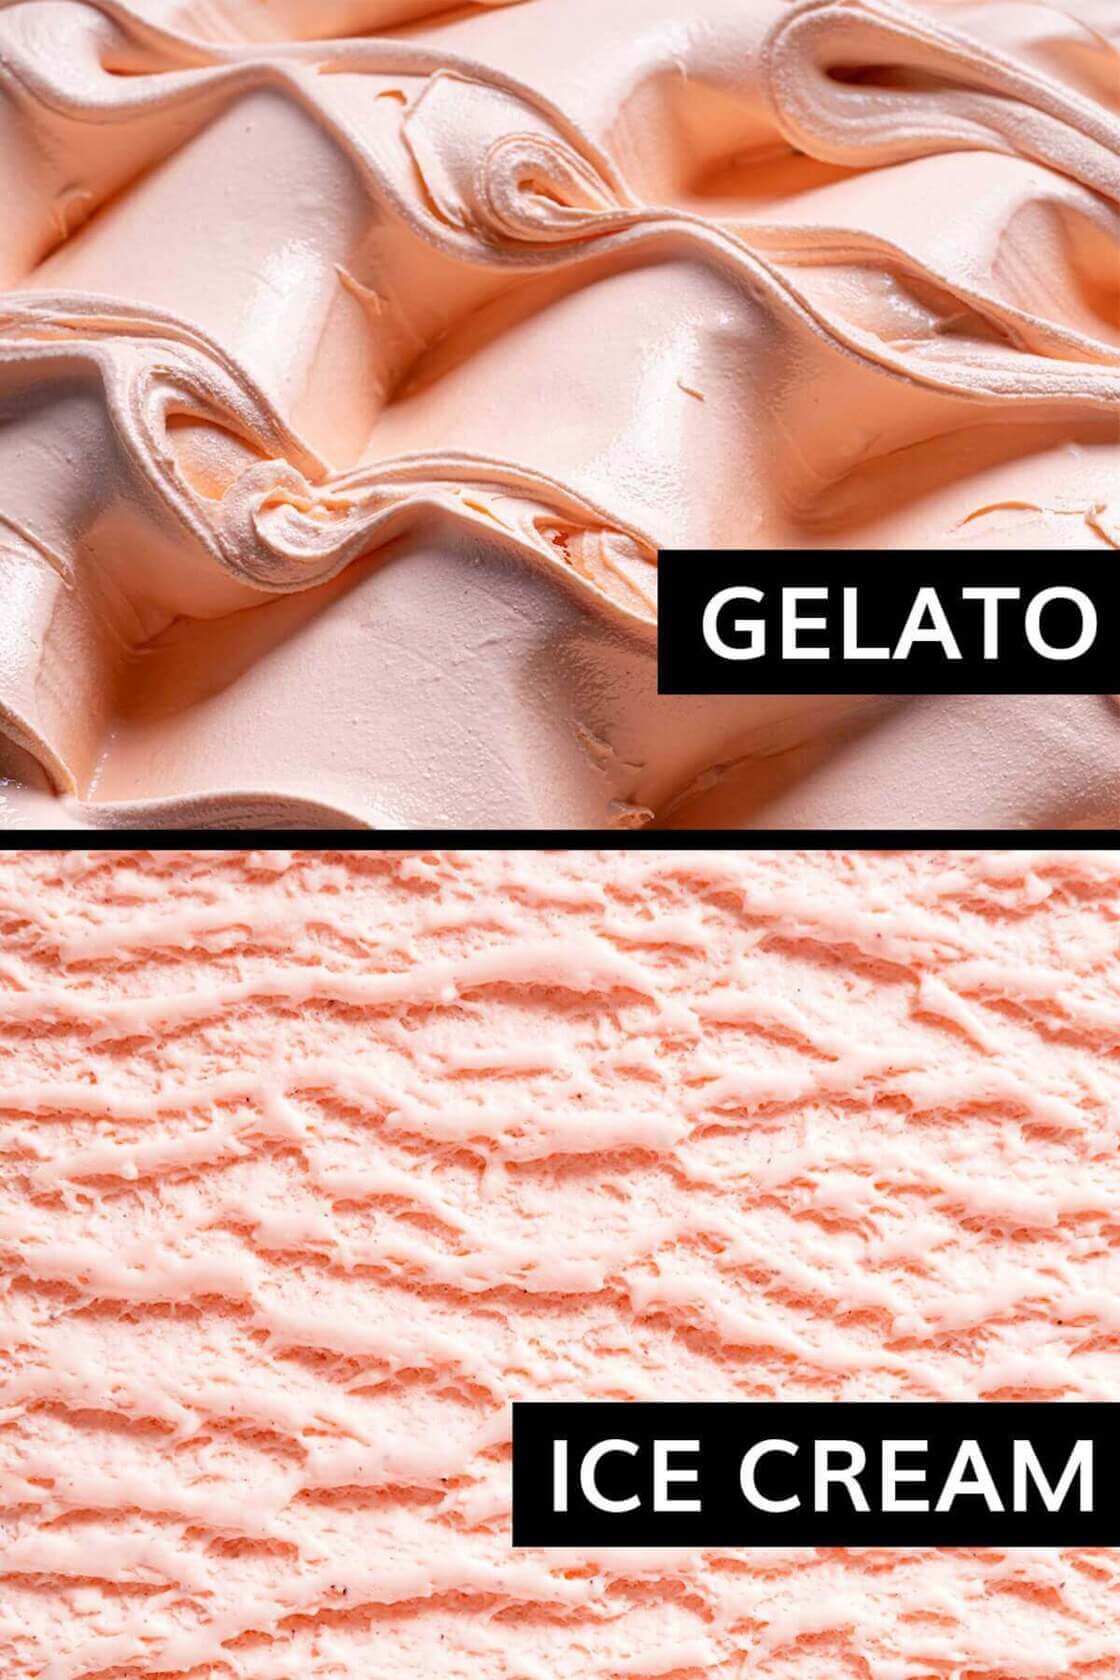 History of gelato: Split-screen picture showing the smooth, silky texture of gelato vs the rough, icier texture of ice cream.